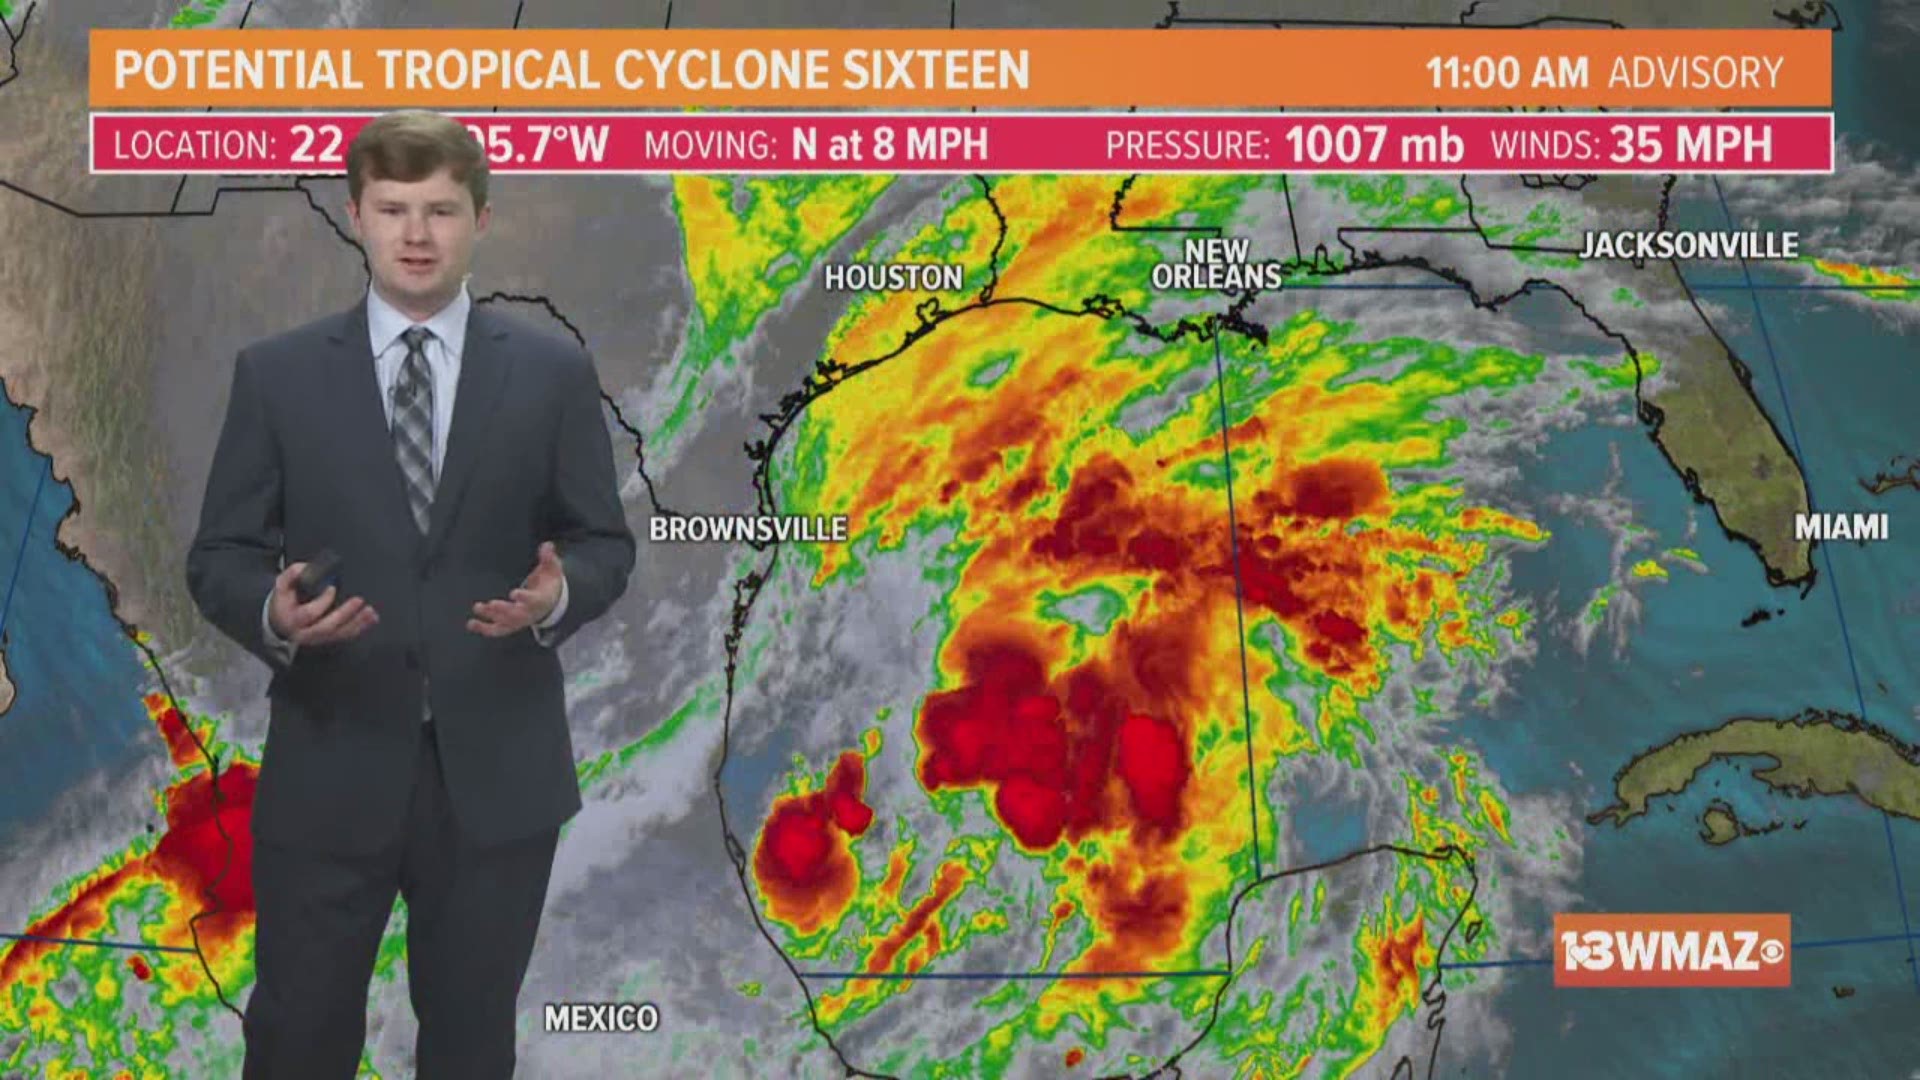 Potential Tropical Cyclone 16 is moving through the Gulf. Here’s the latest radars, models, tracks, and forecast for Georgia from Meteorologist Austin Chaney.